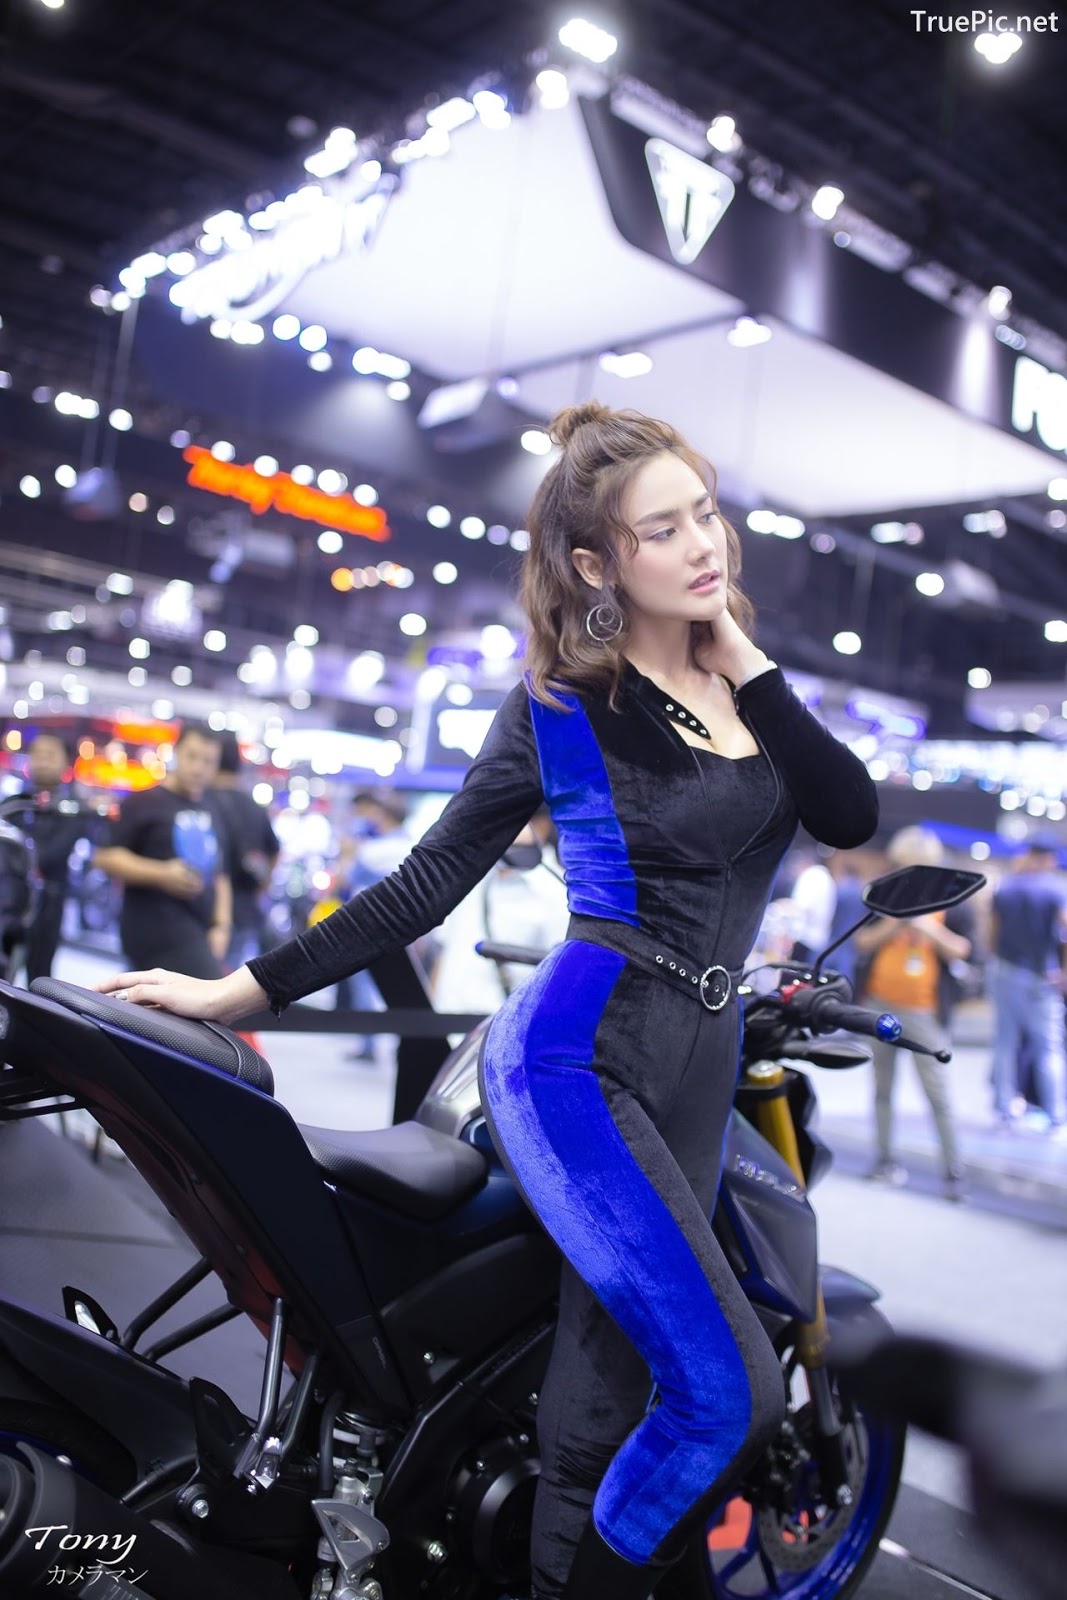 Image-Thailand-Hot-Model-Thai-Racing-Girl-At-Motor-Expo-2018-TruePic.net- Picture-23